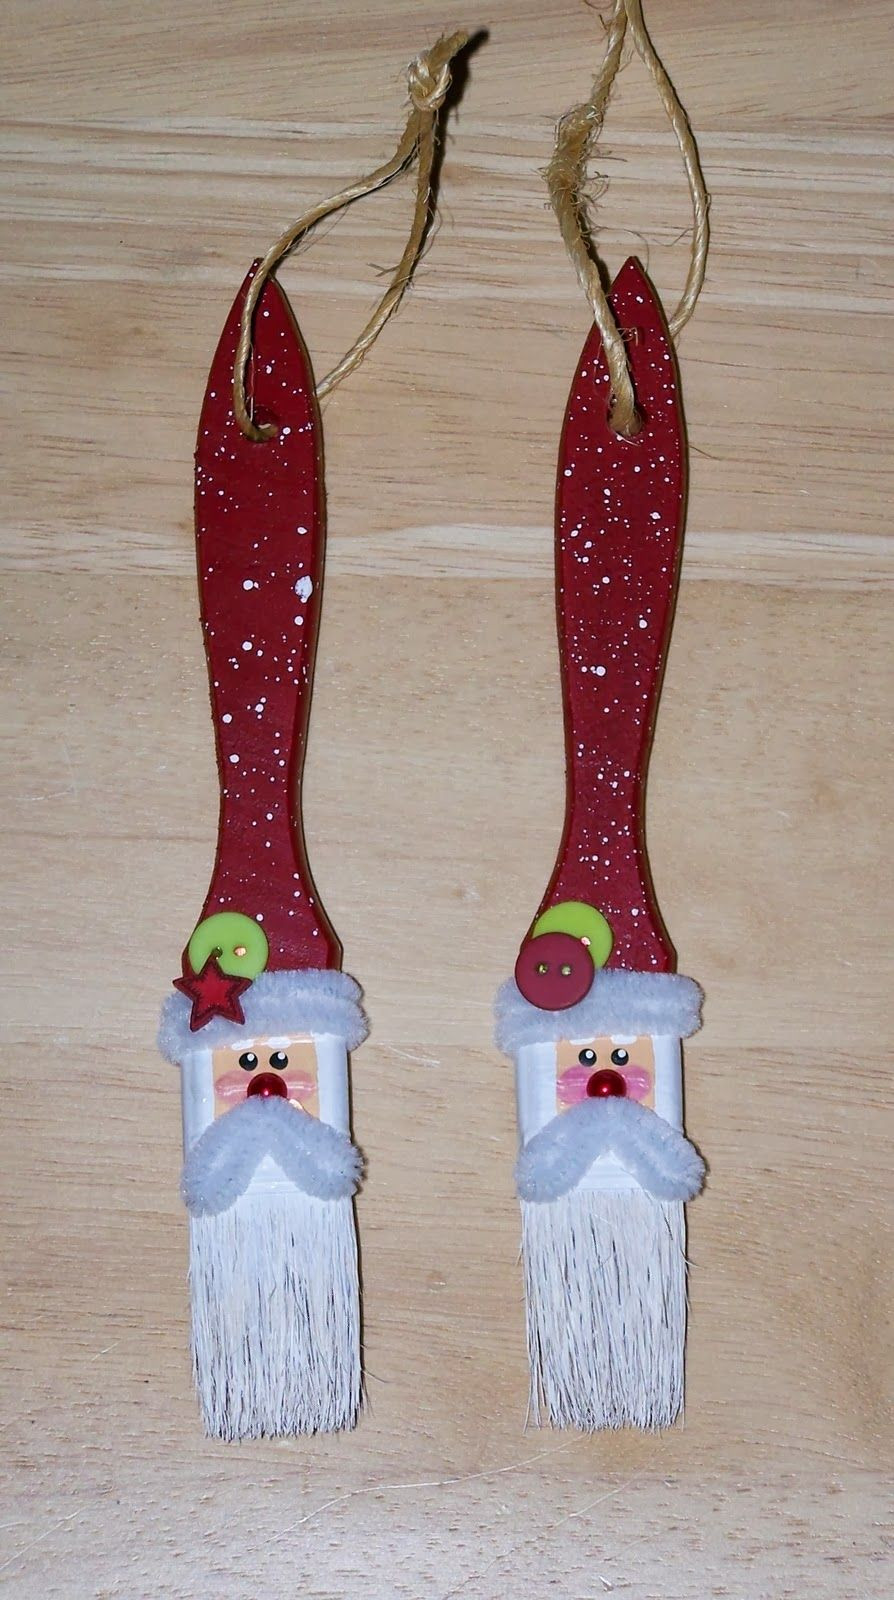 Best ideas about Pinterest DIY Christmas Crafts
. Save or Pin pinterest christmas crafts to sell – Google Search More Now.